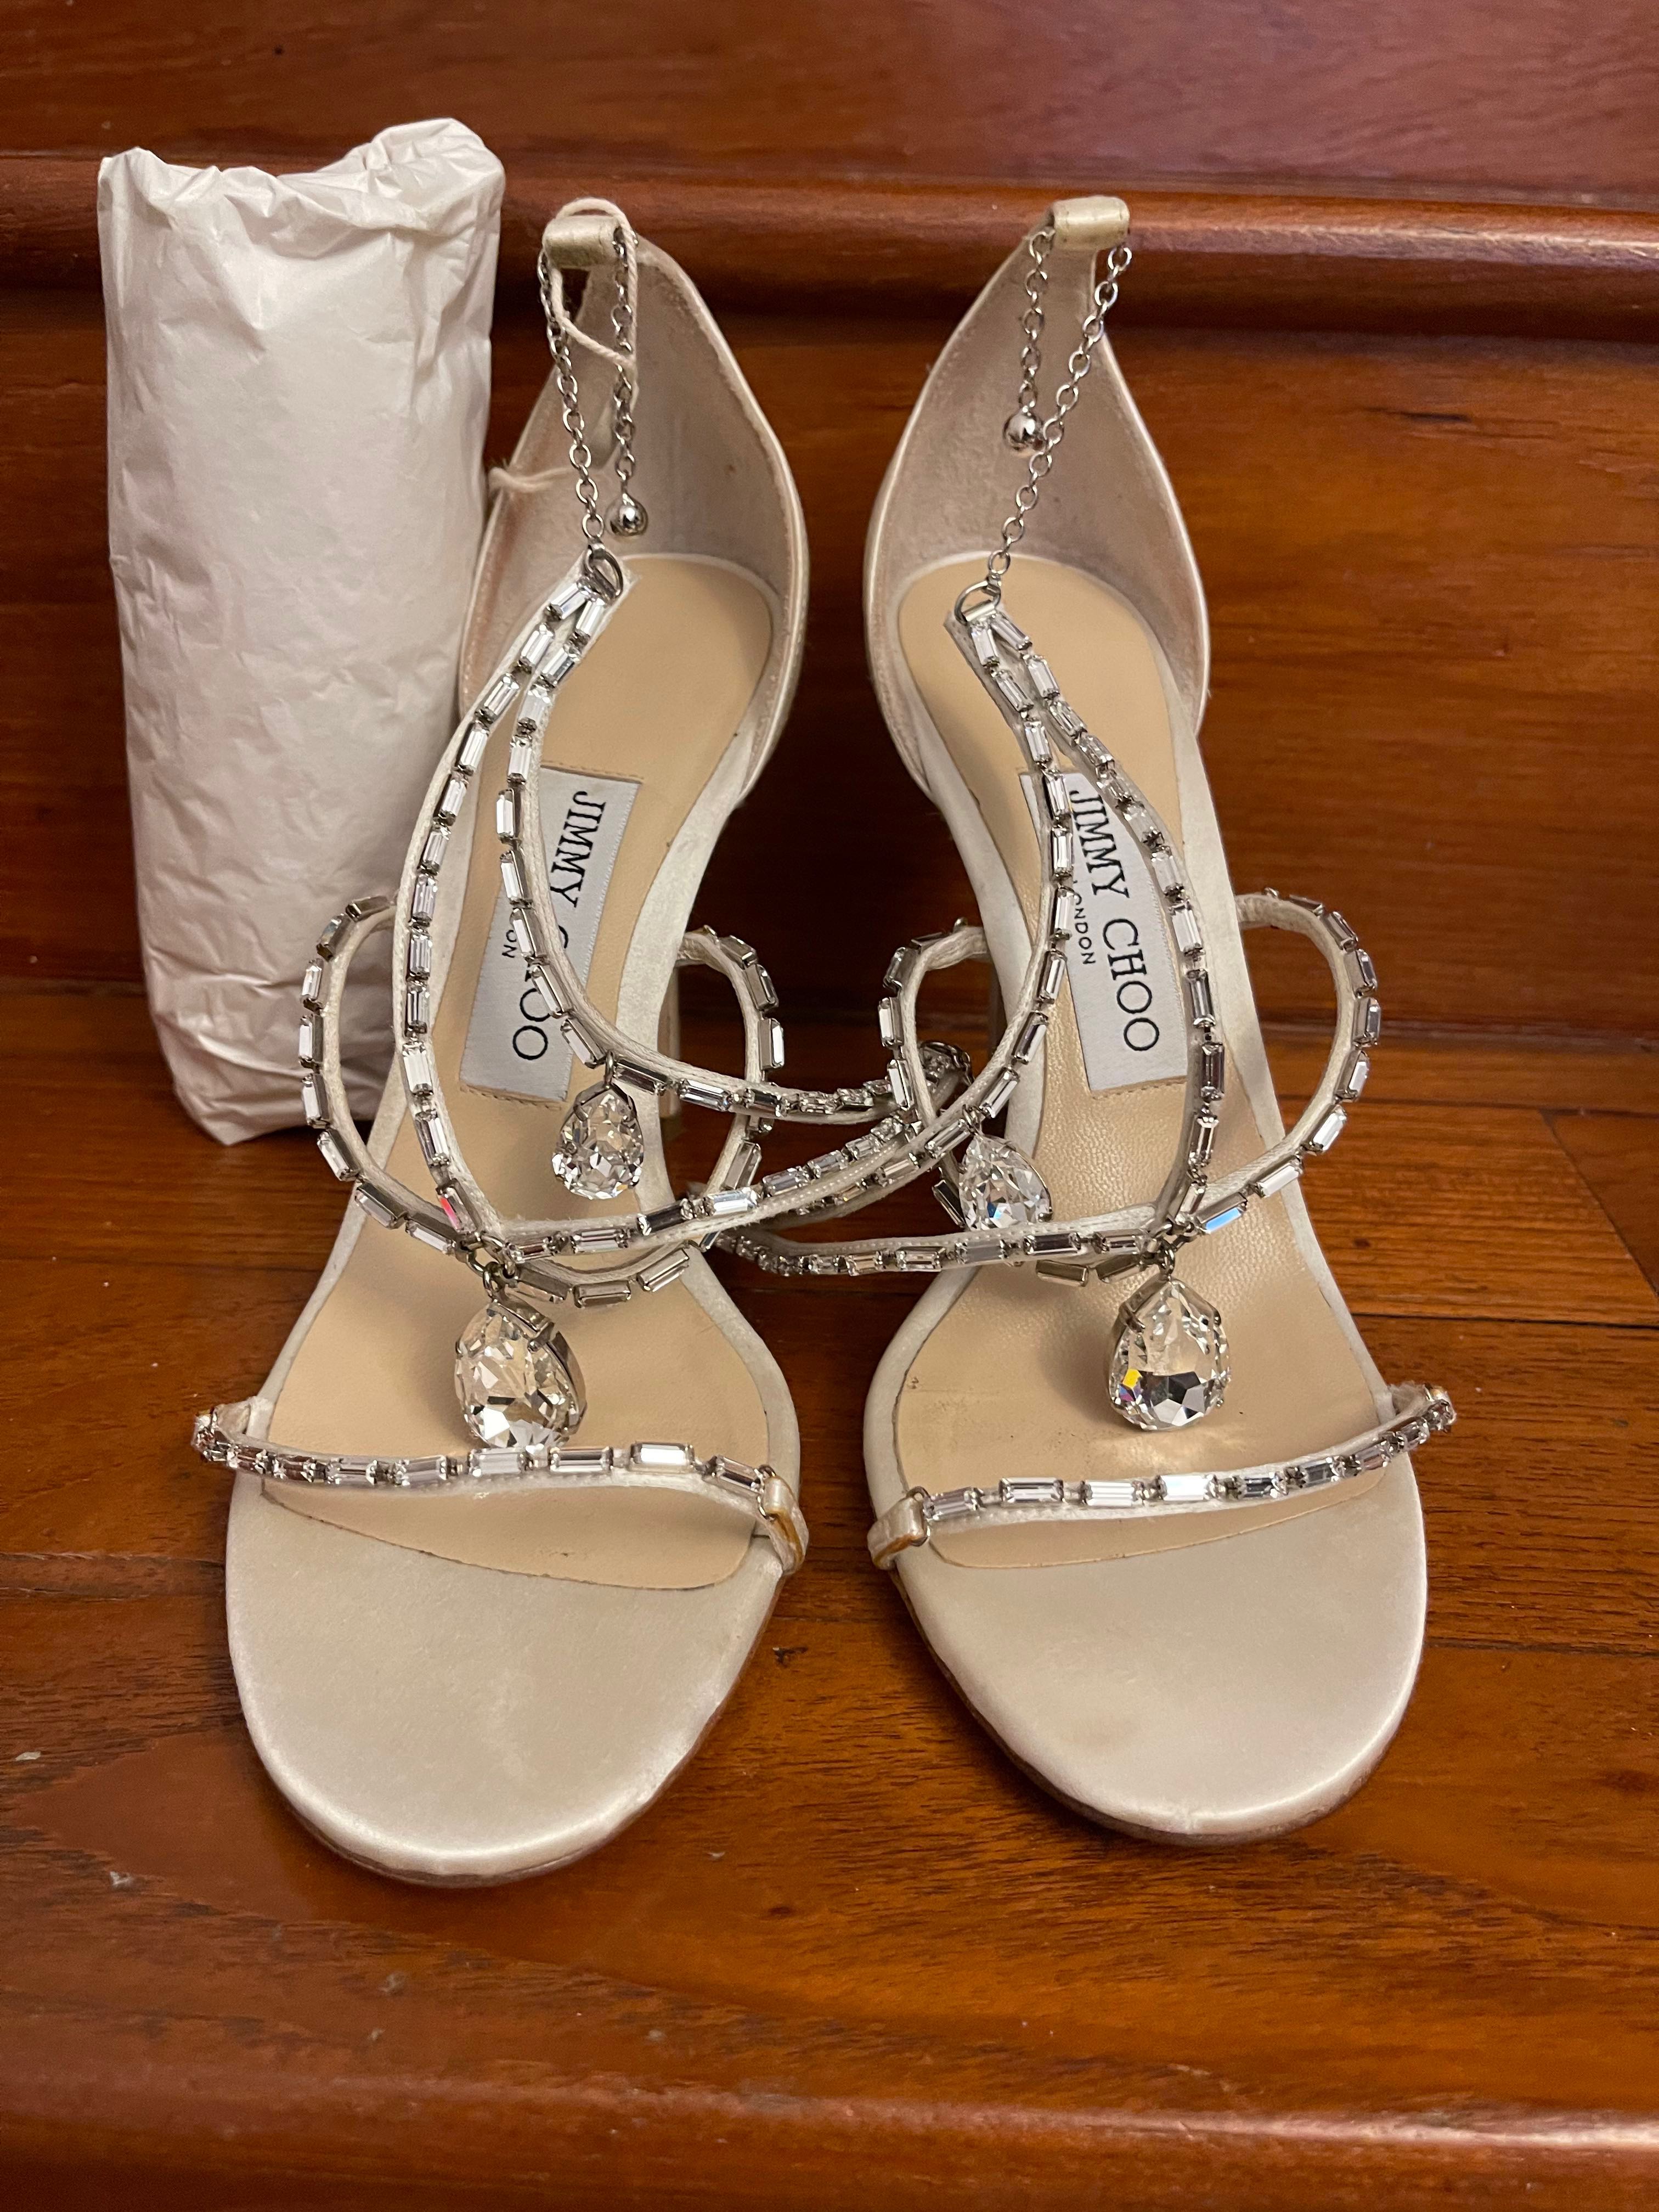 Share 221+ jimmy choo crystal sandals best